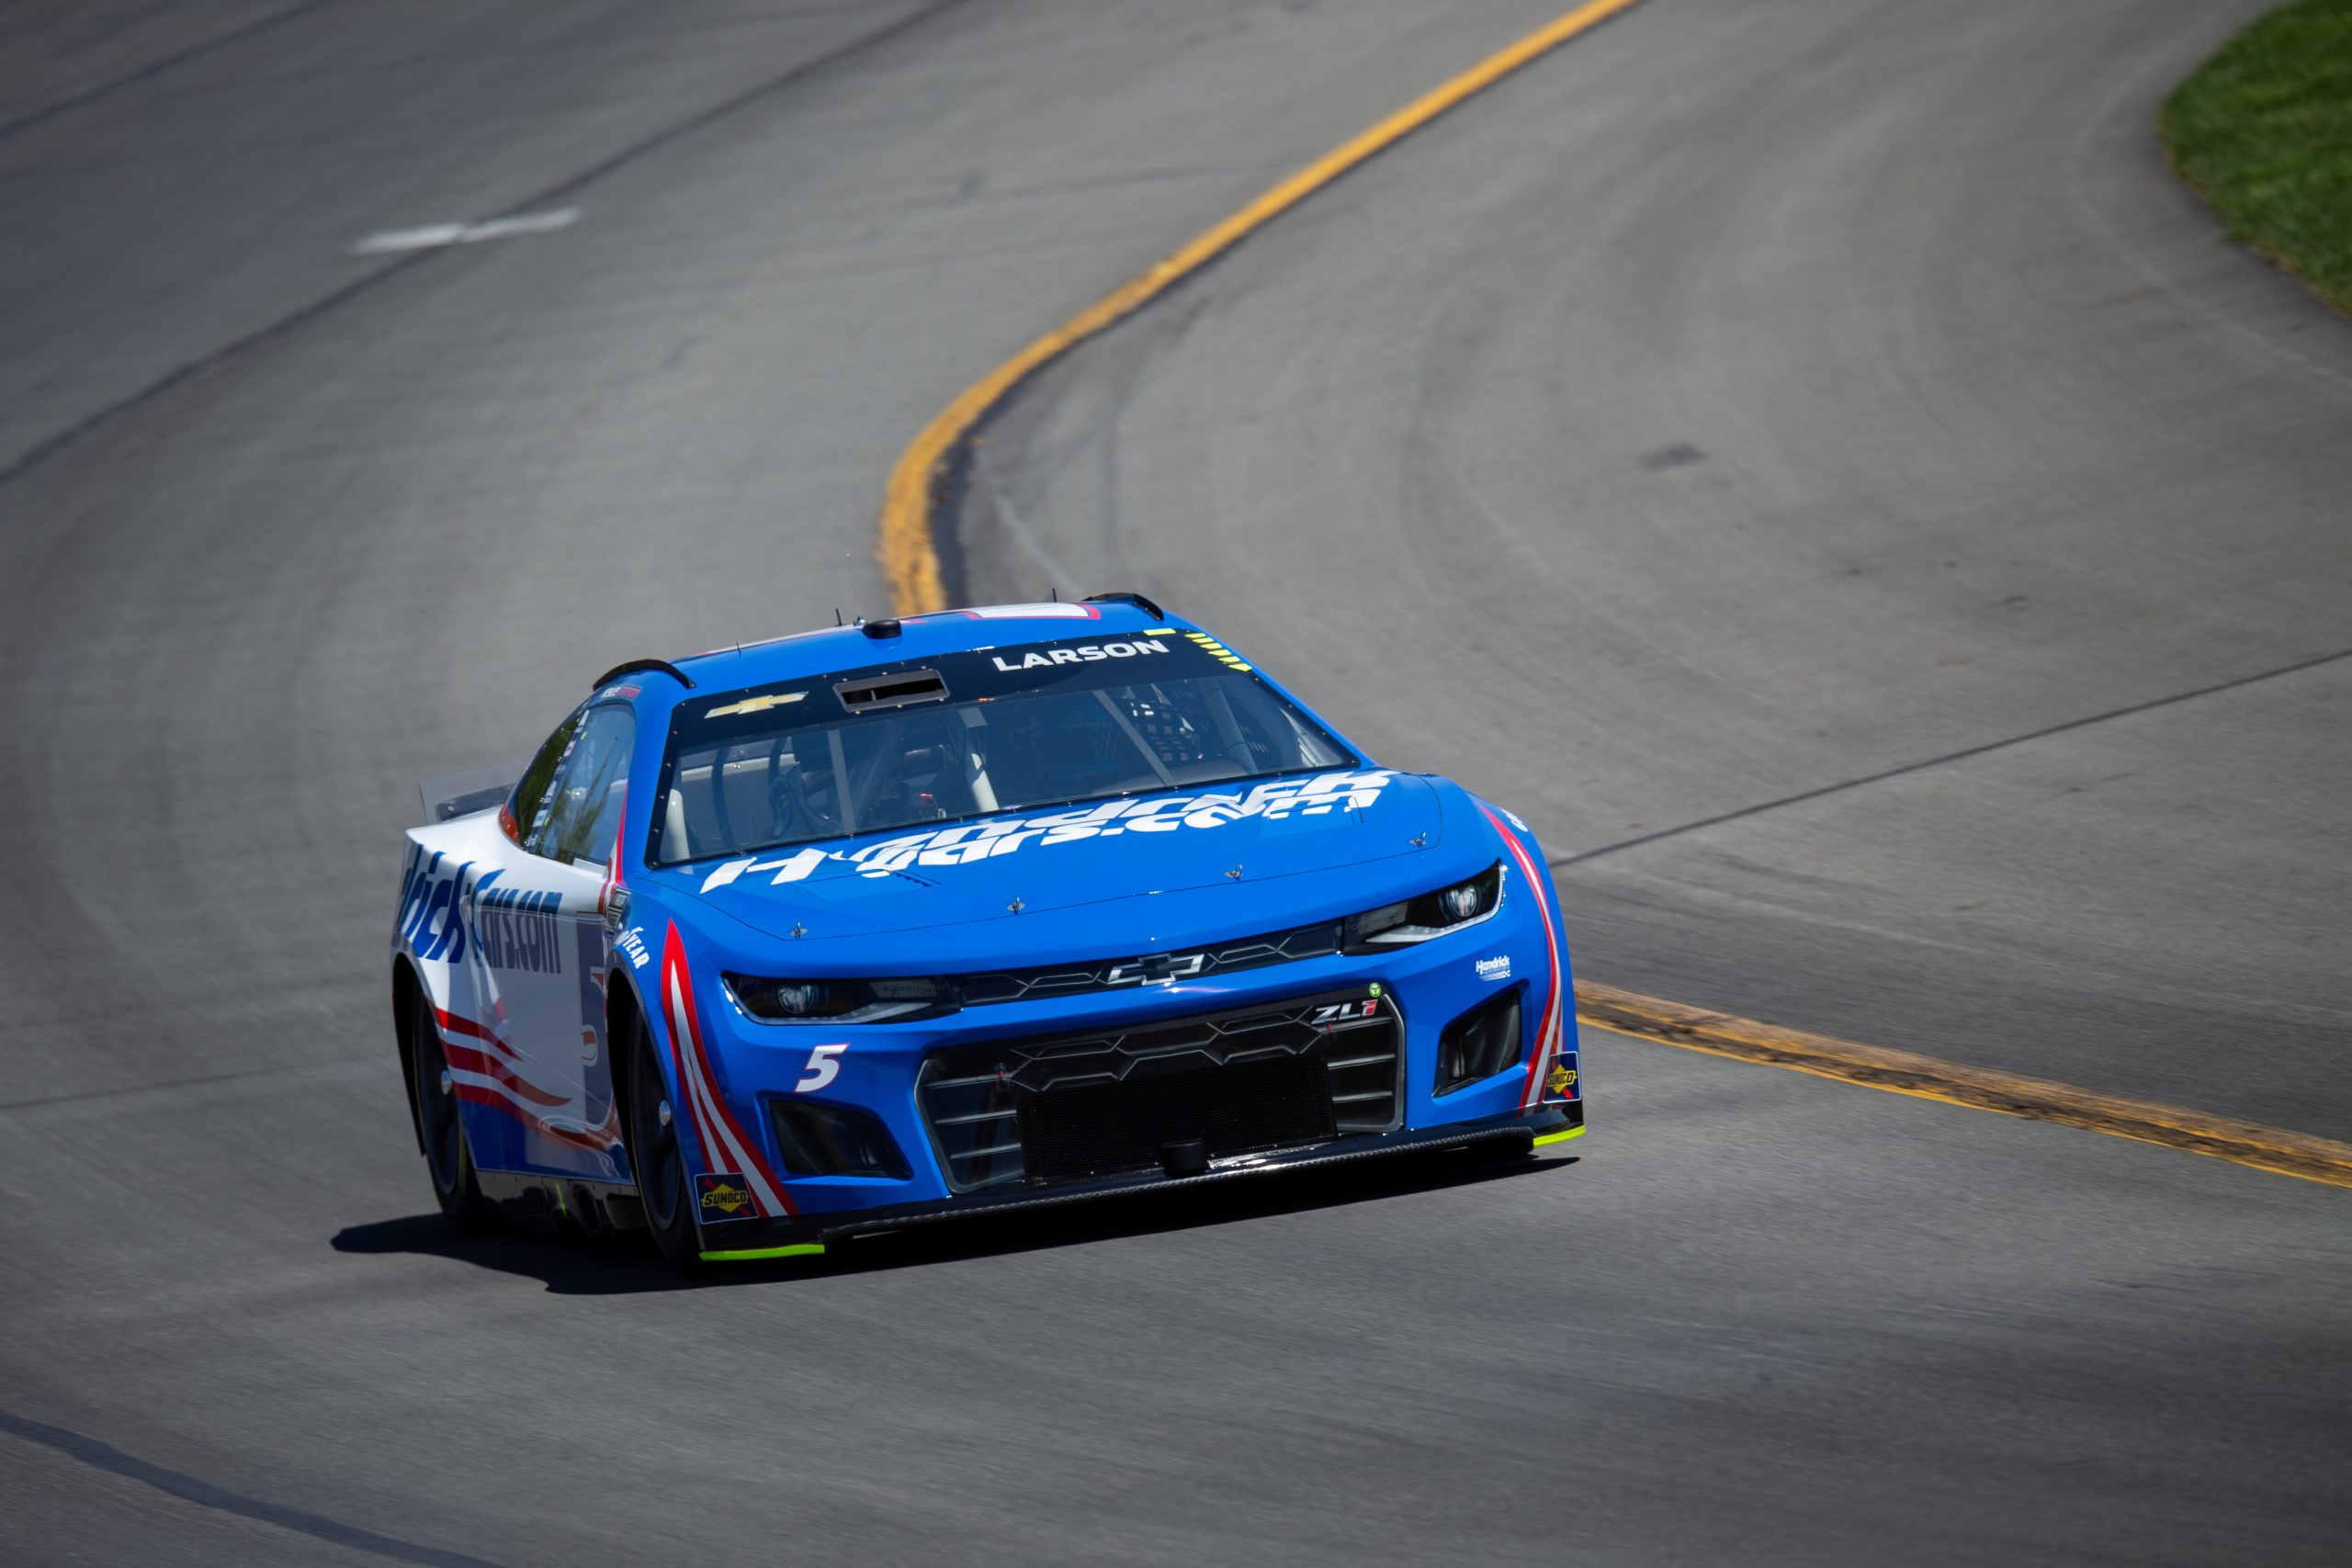 From a flat tire to a crinkled front clip, Larson hasn't let last year's races affect his mindset entering Sunday's race at Pocono. (Photo: Sam Draiss | The Podium Finish)